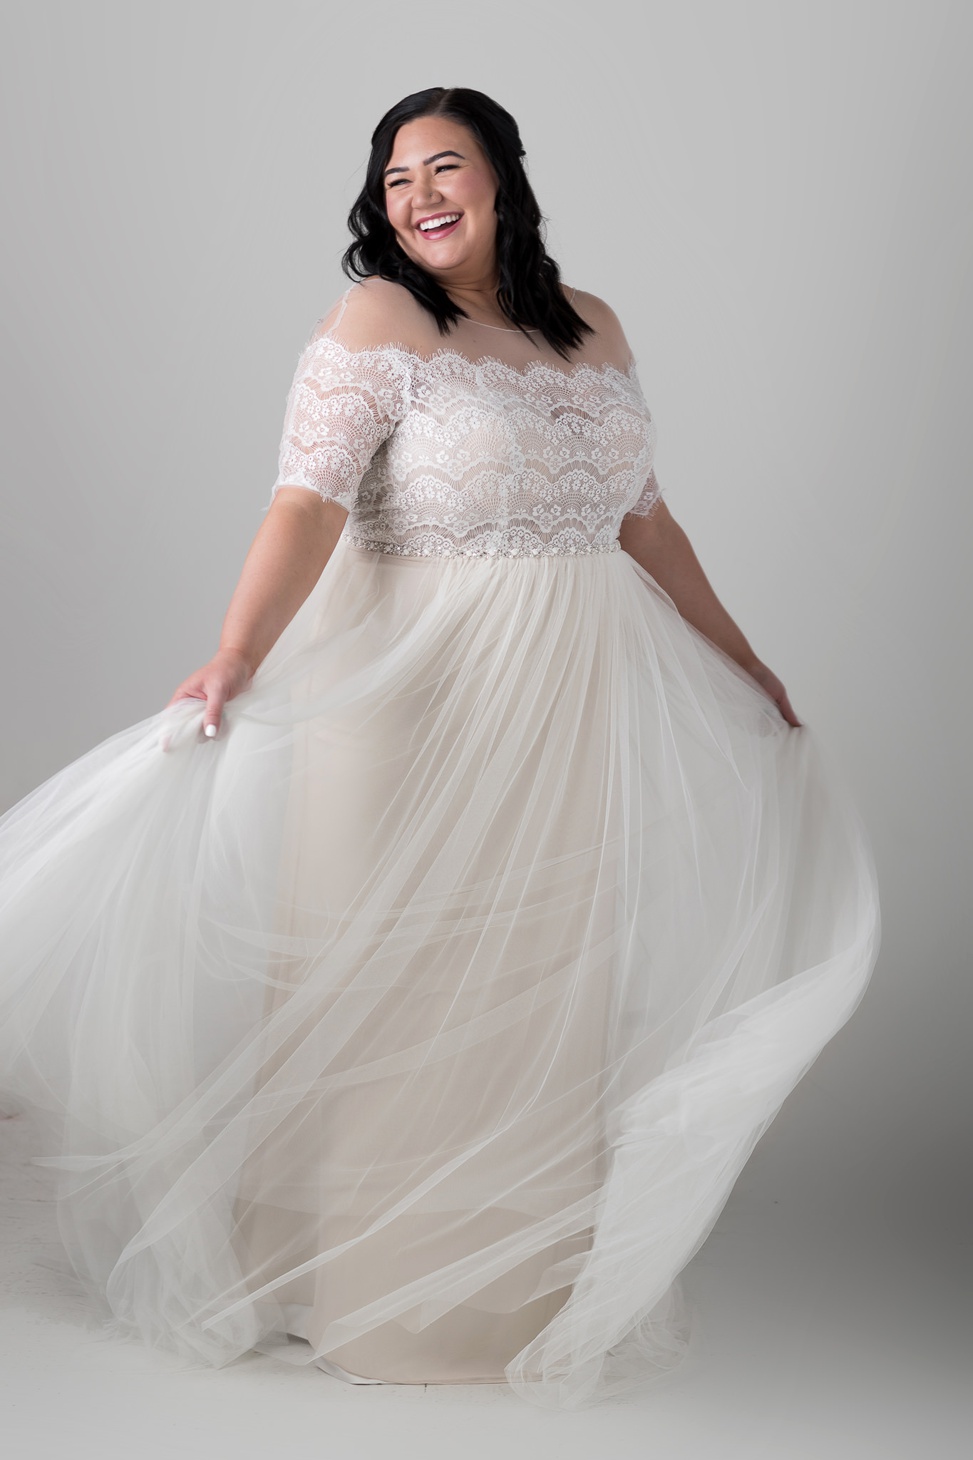 a plus size bride smiles and twirls in the cathy dress from rebecca ingram